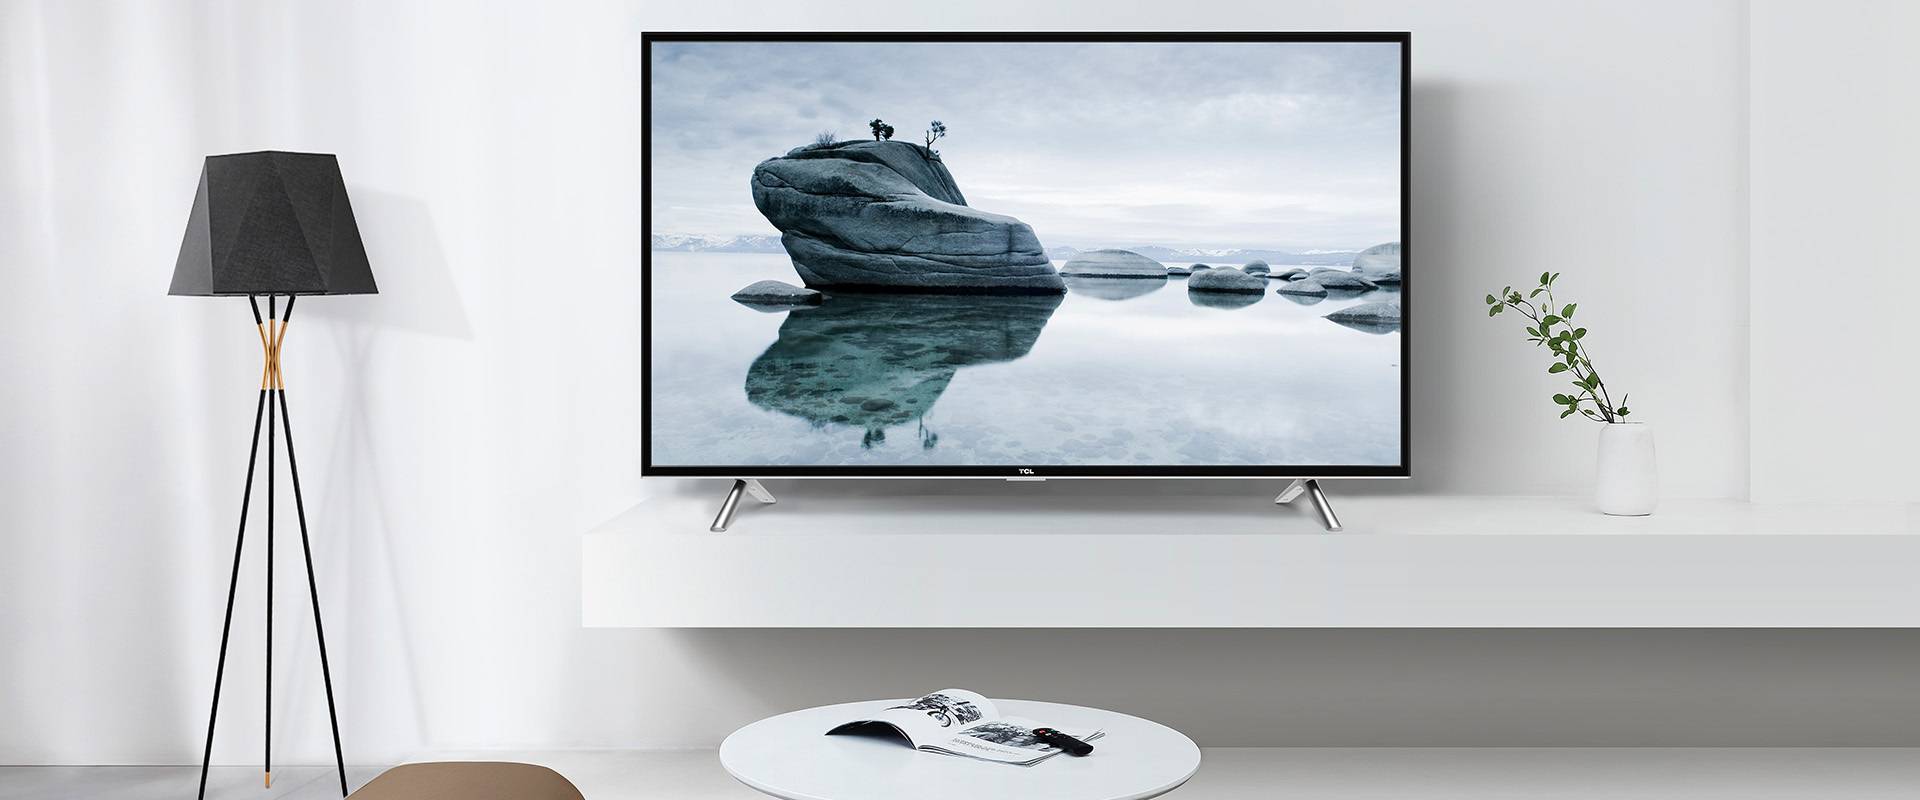 how-to-set-the-best-picture-on-a-samsung-led-tv